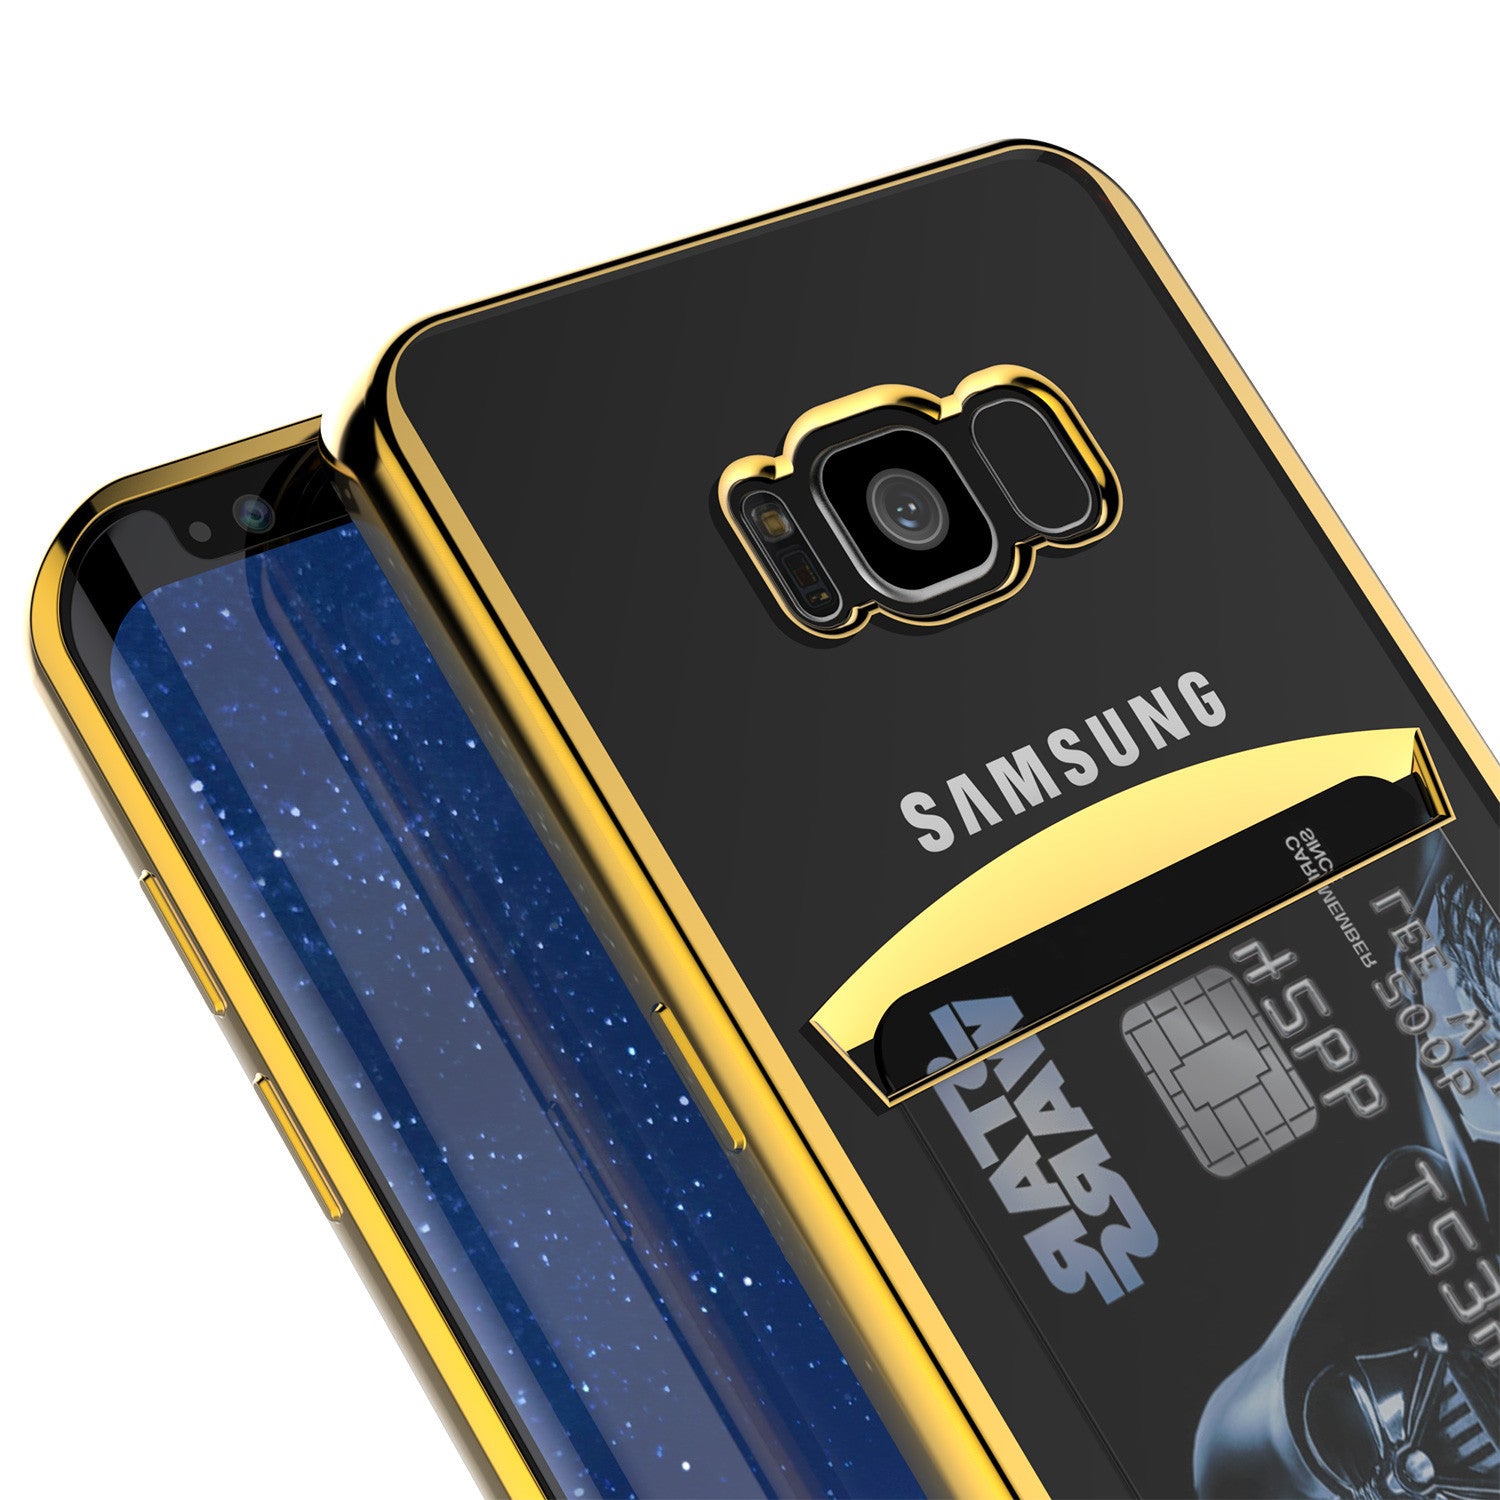 Galaxy S8 Case, PUNKCASE® LUCID Gold Series | Card Slot | SHIELD Screen Protector | Ultra fit